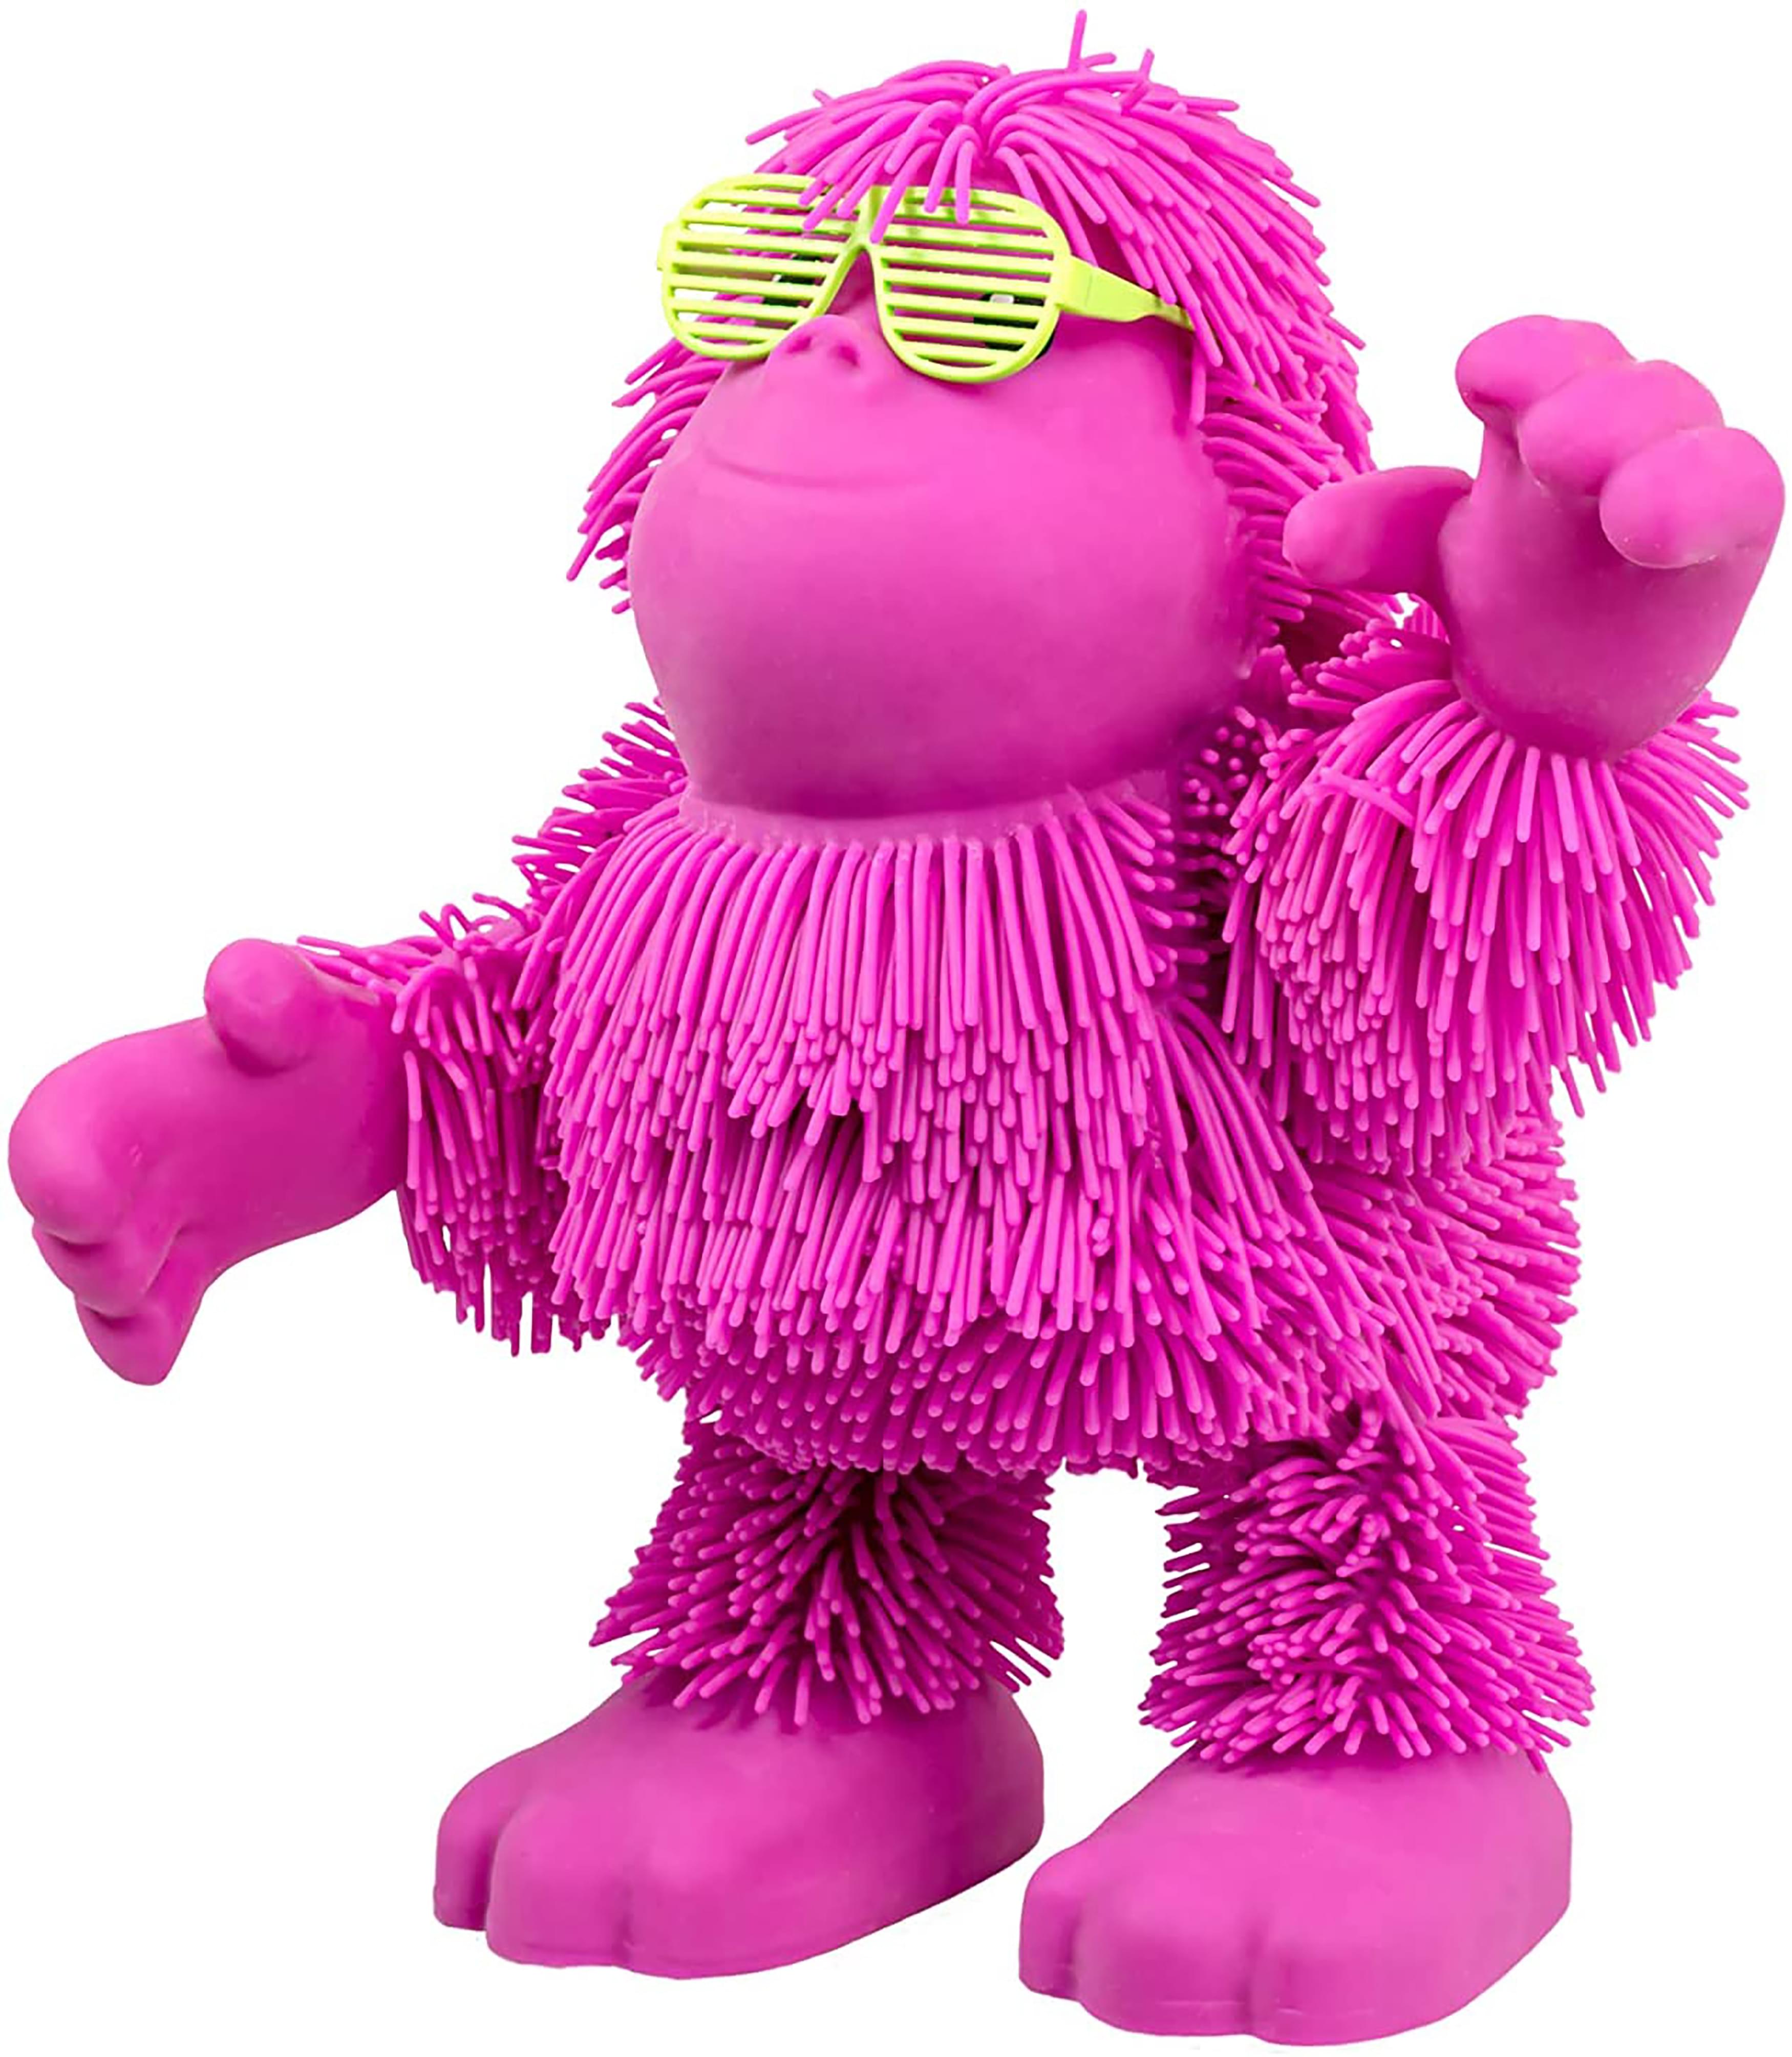 Jiggly Pets Pink Tan-Tan The Orangutan Electronic Toy With Movement And Sound